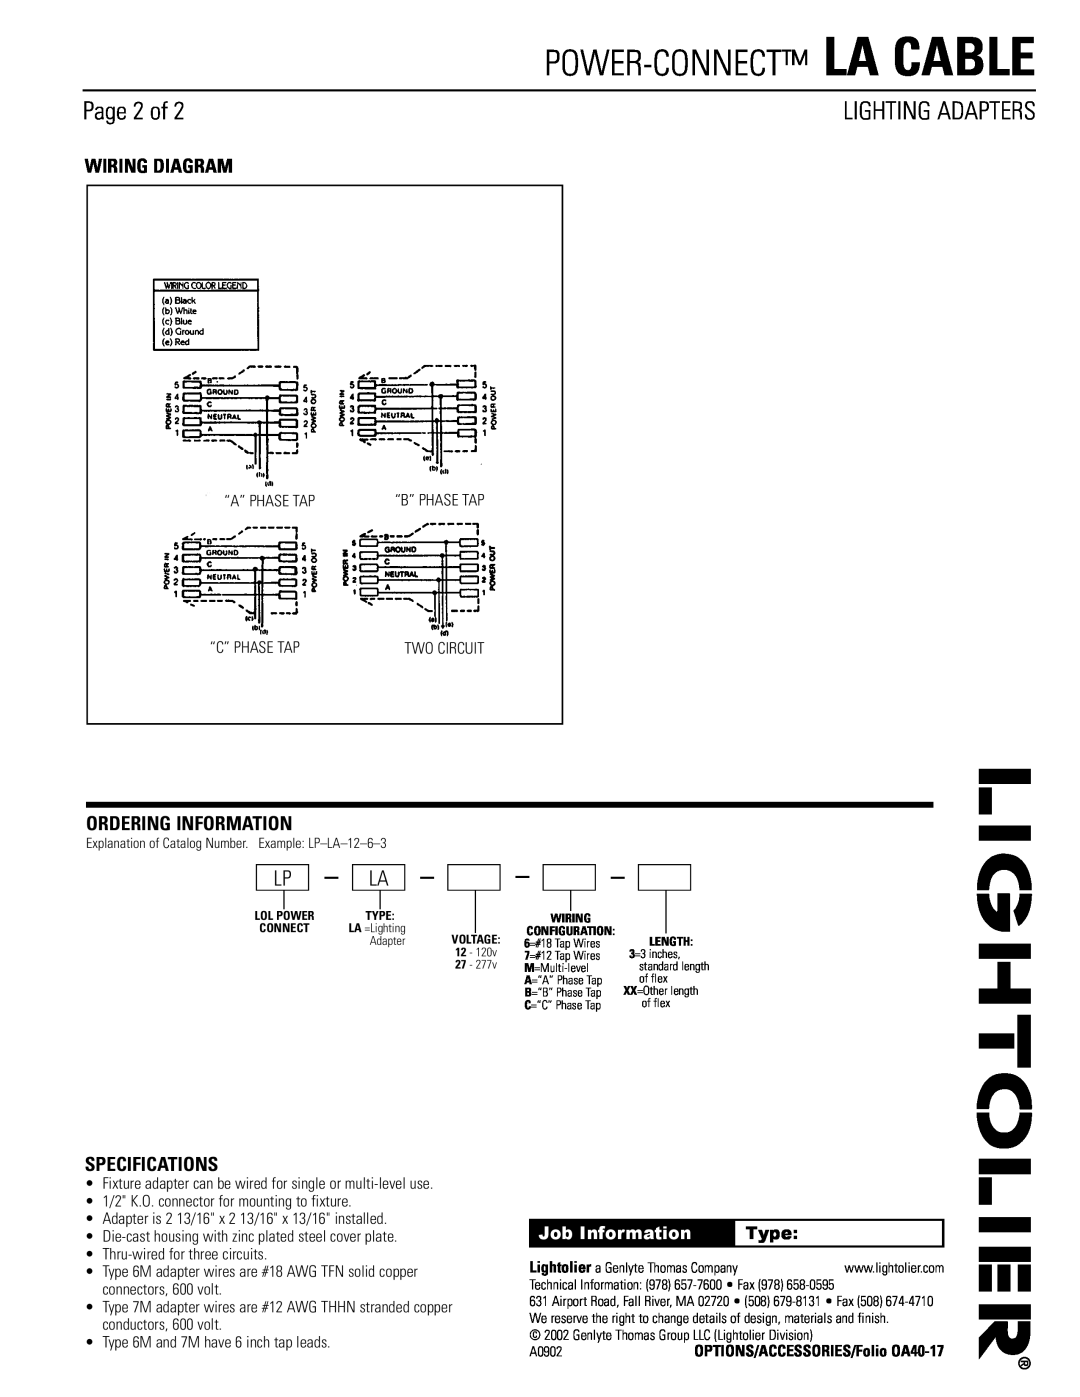 Lightolier Page 2 of, Wiring Diagram, Ordering Information, Specifications, Power-Connect La Cable, Lighting Adapters 